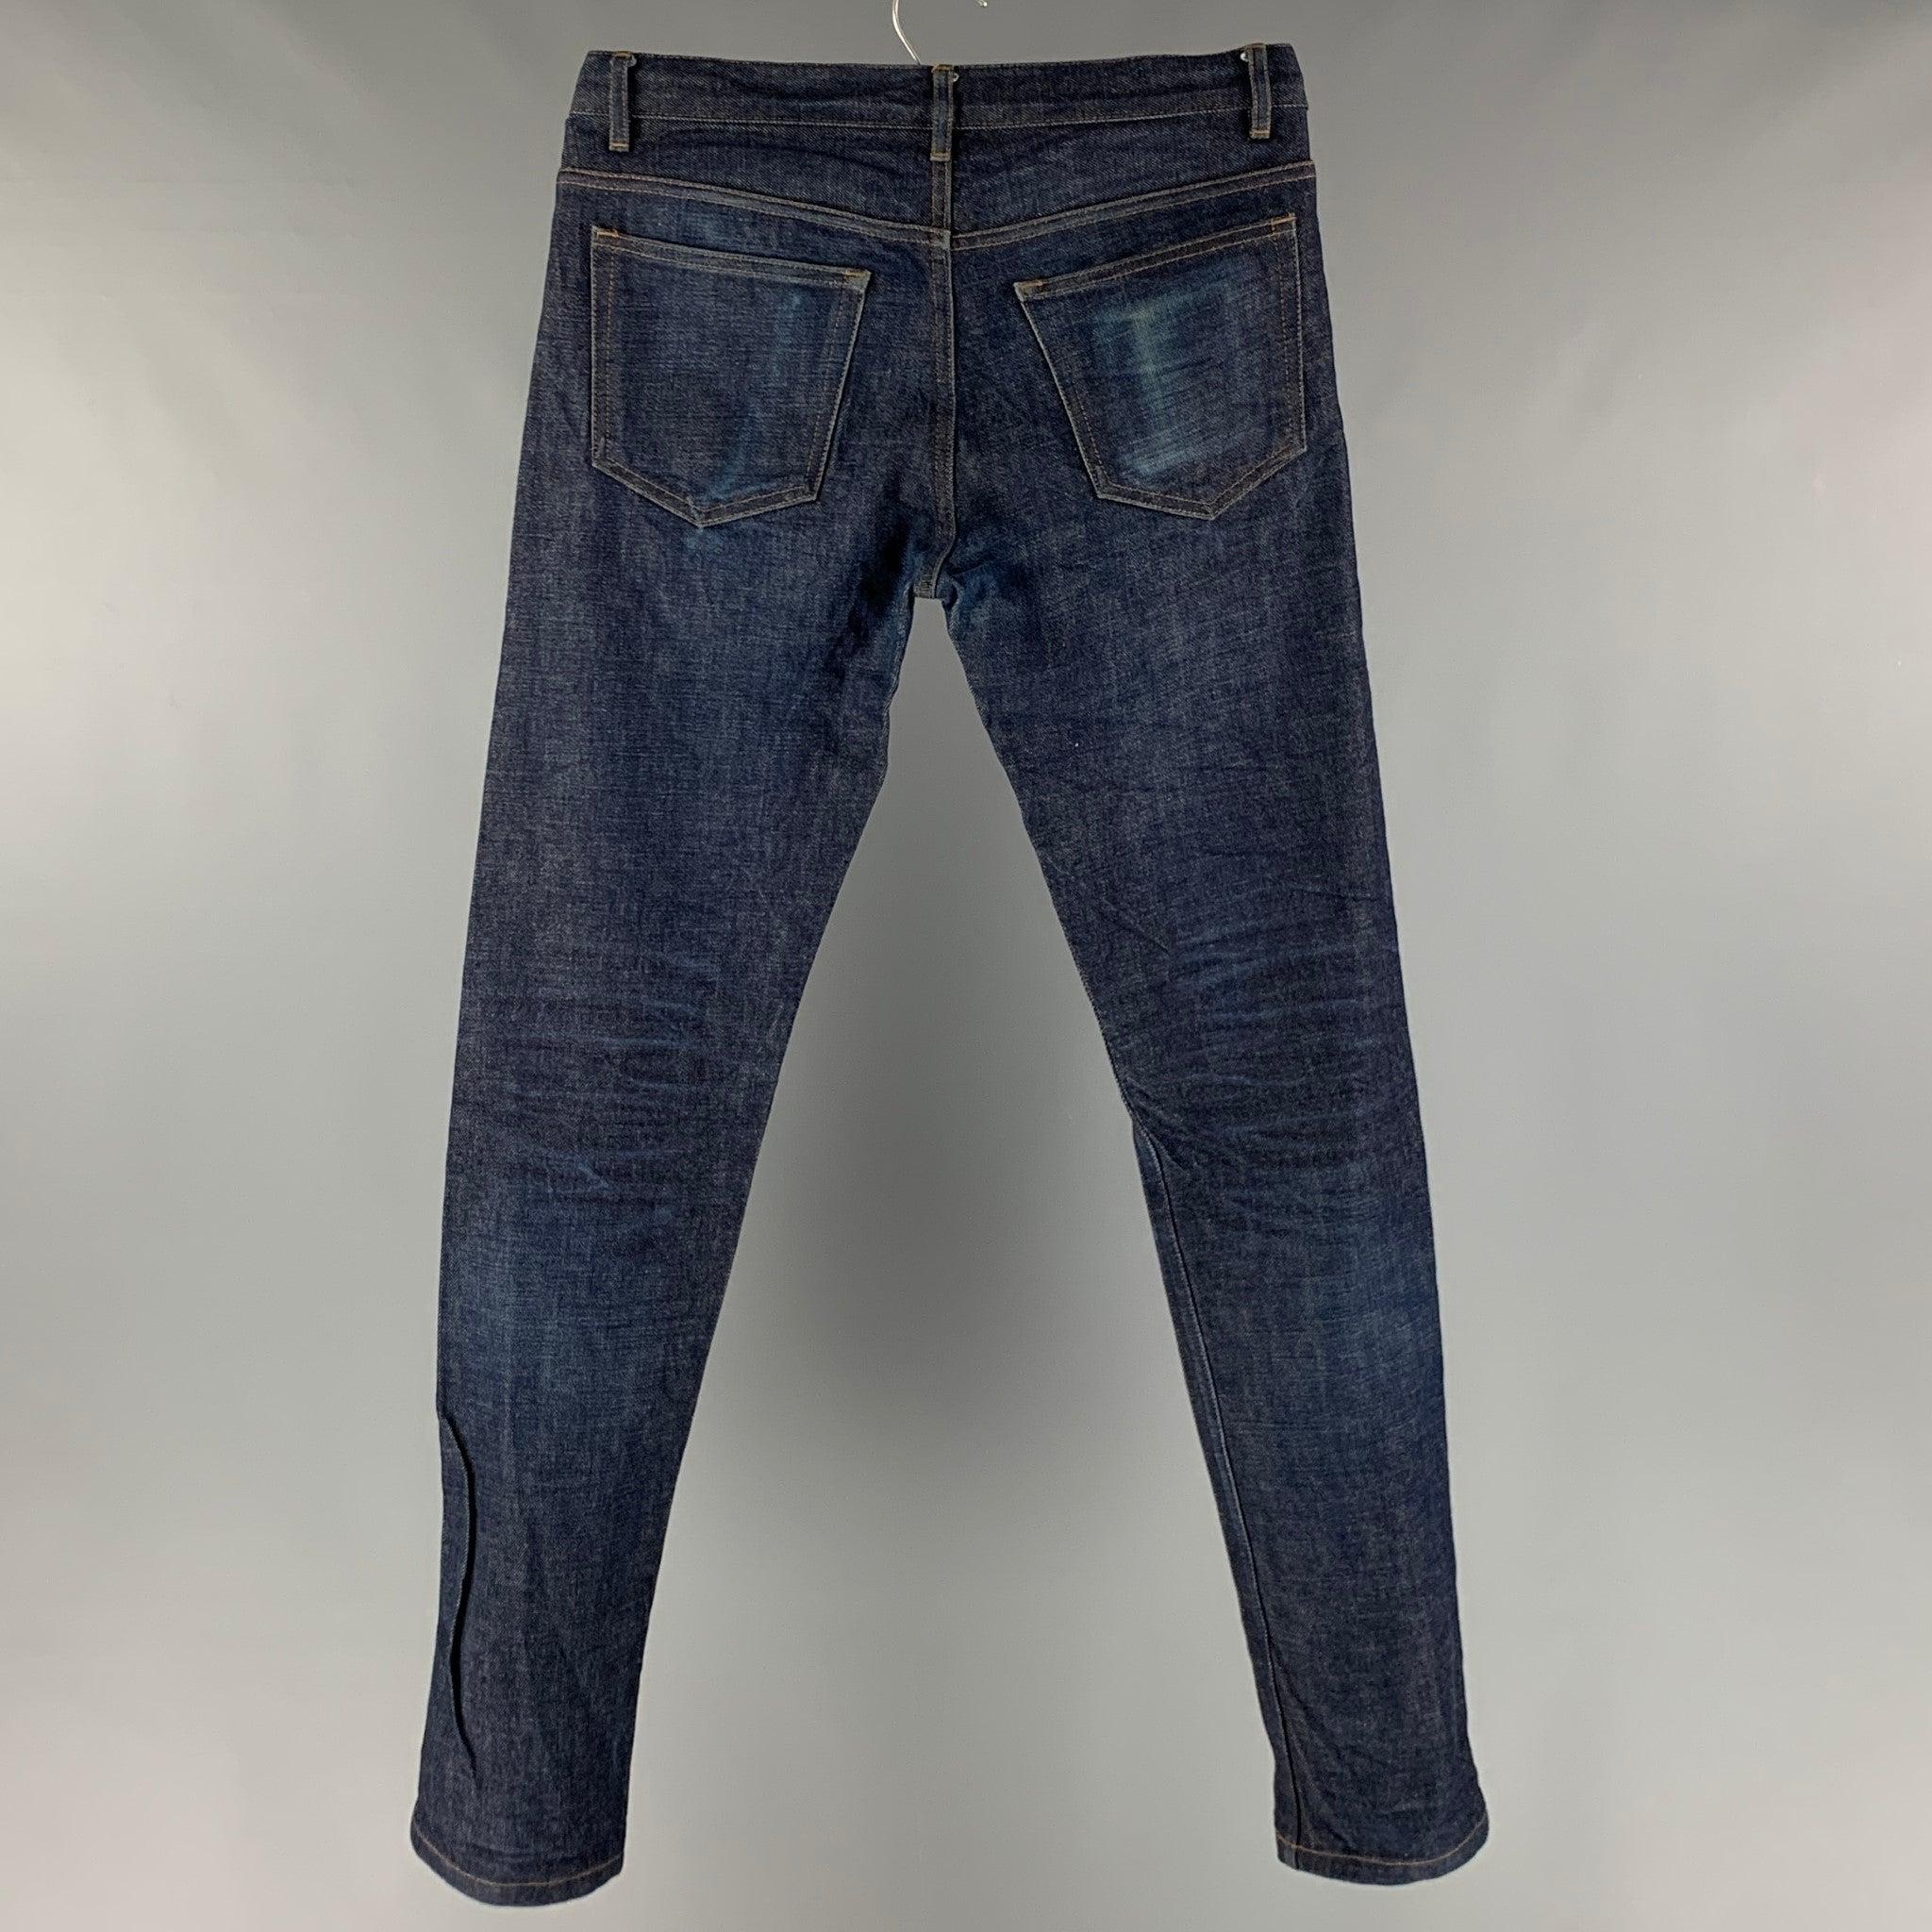 A.P.C jeans comes in a dark blue cotton featuring a straight leg, contrast stitching, and a button fly closure. Very Good Pre-Owned Condition. 

Marked:   29 

Measurements: 
  Waist: 30 inches Rise: 9.5 inches Inseam: 30 inches  
  
  
 
Reference: